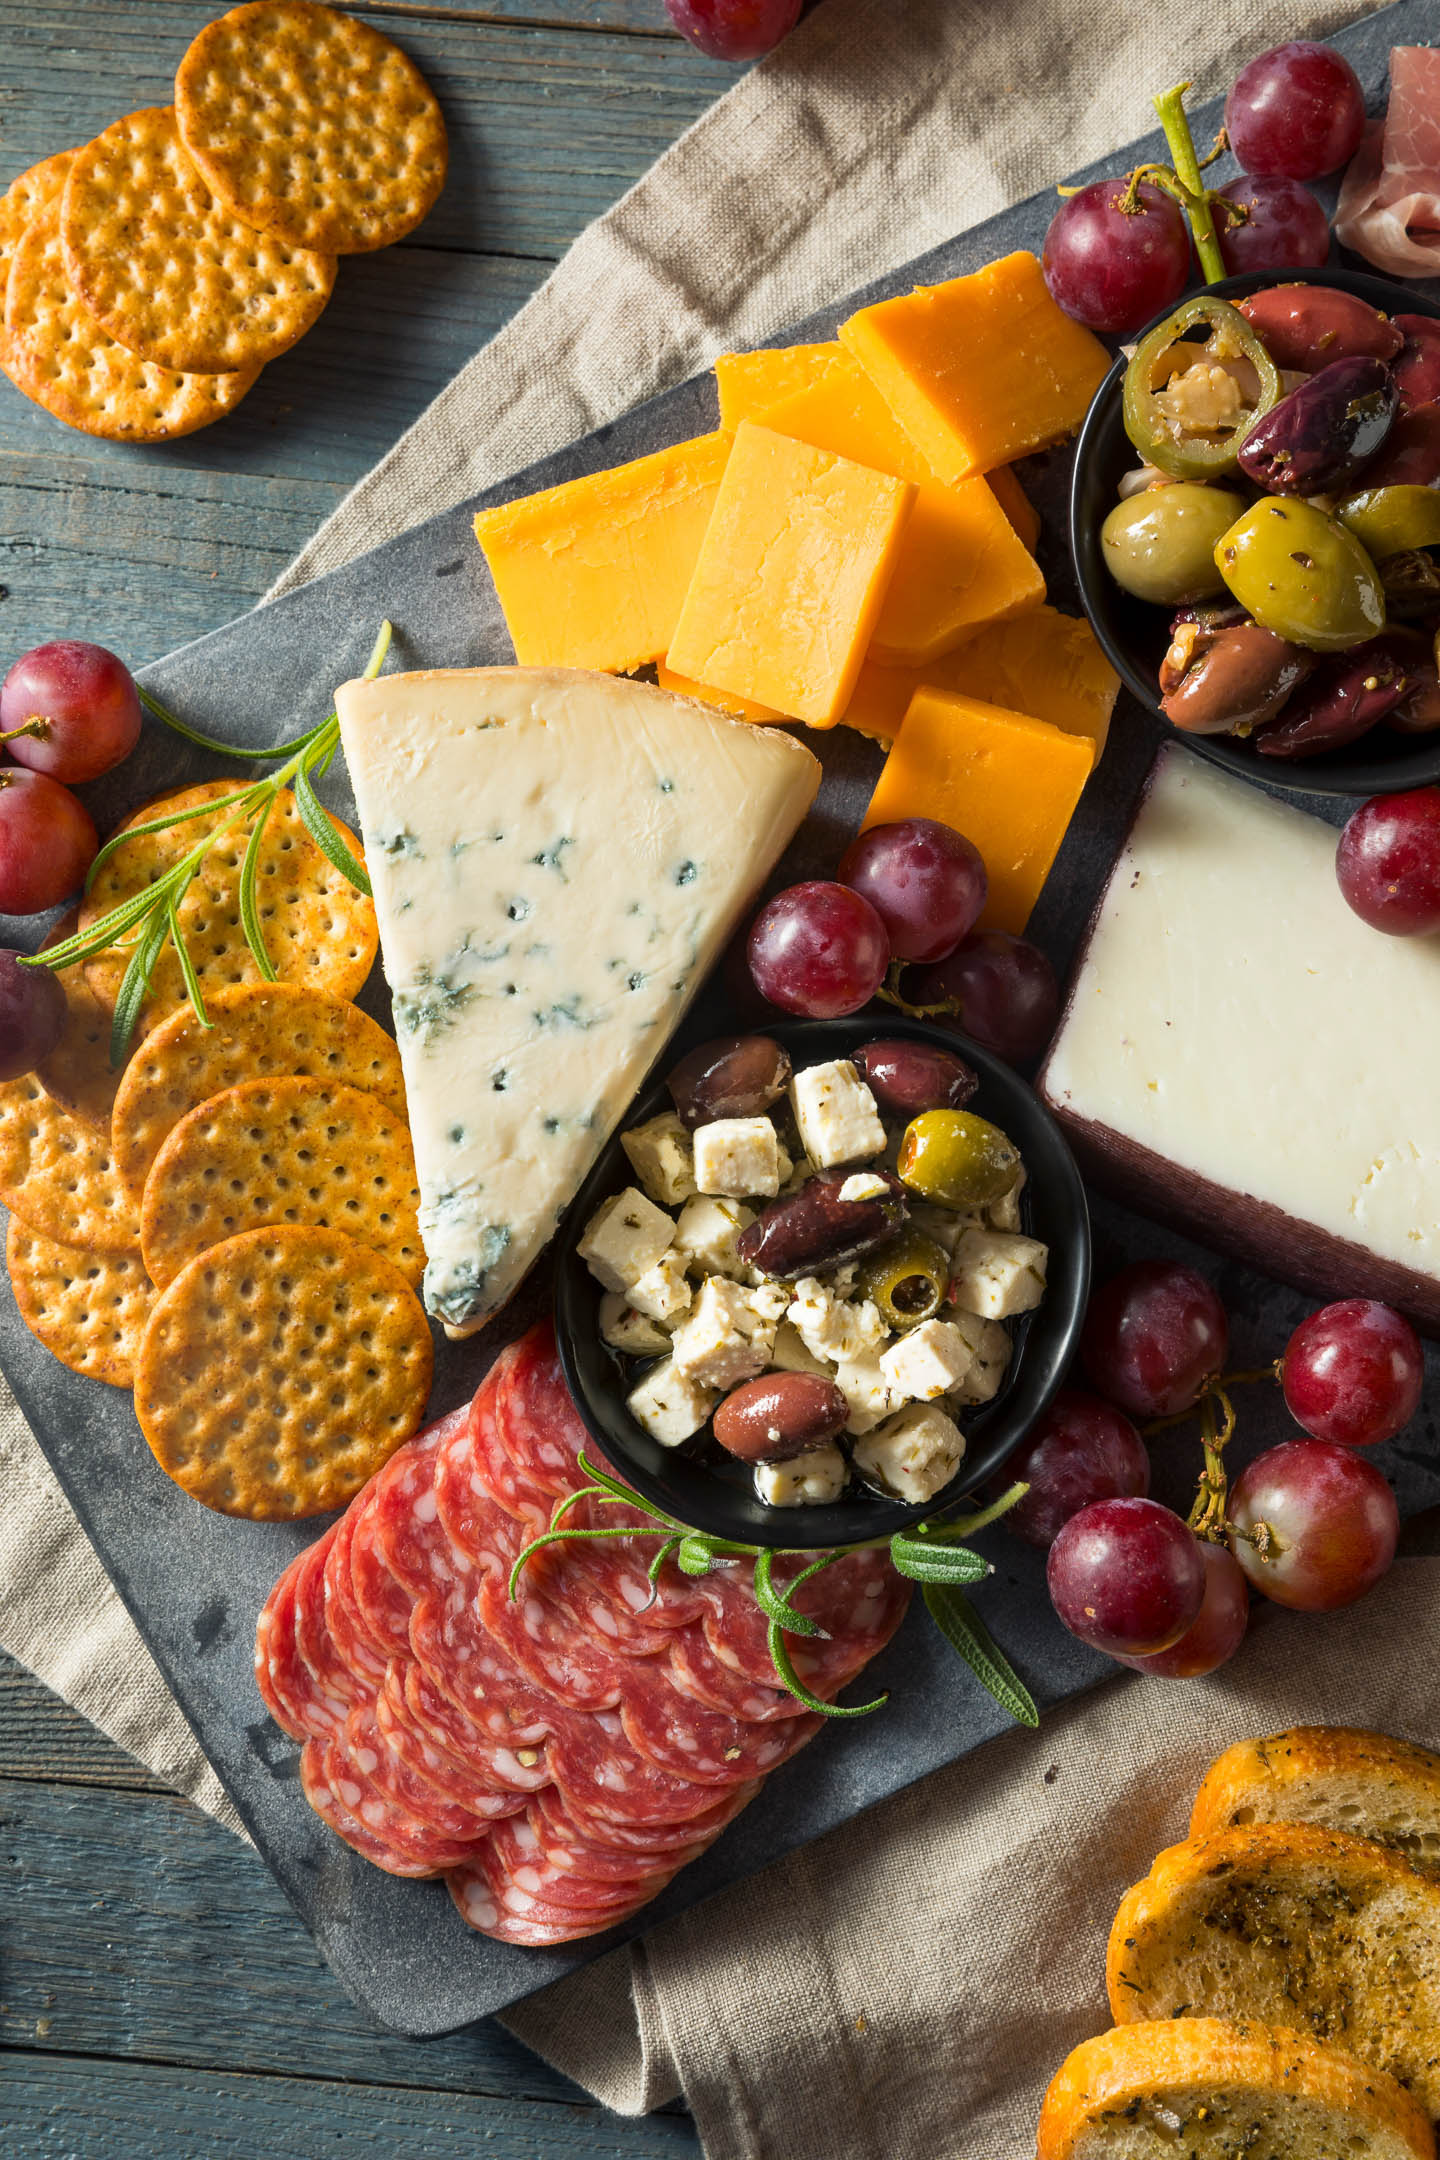 Rectangular charcuterie board with cheeses, olives, grapes, slices of meat and bread